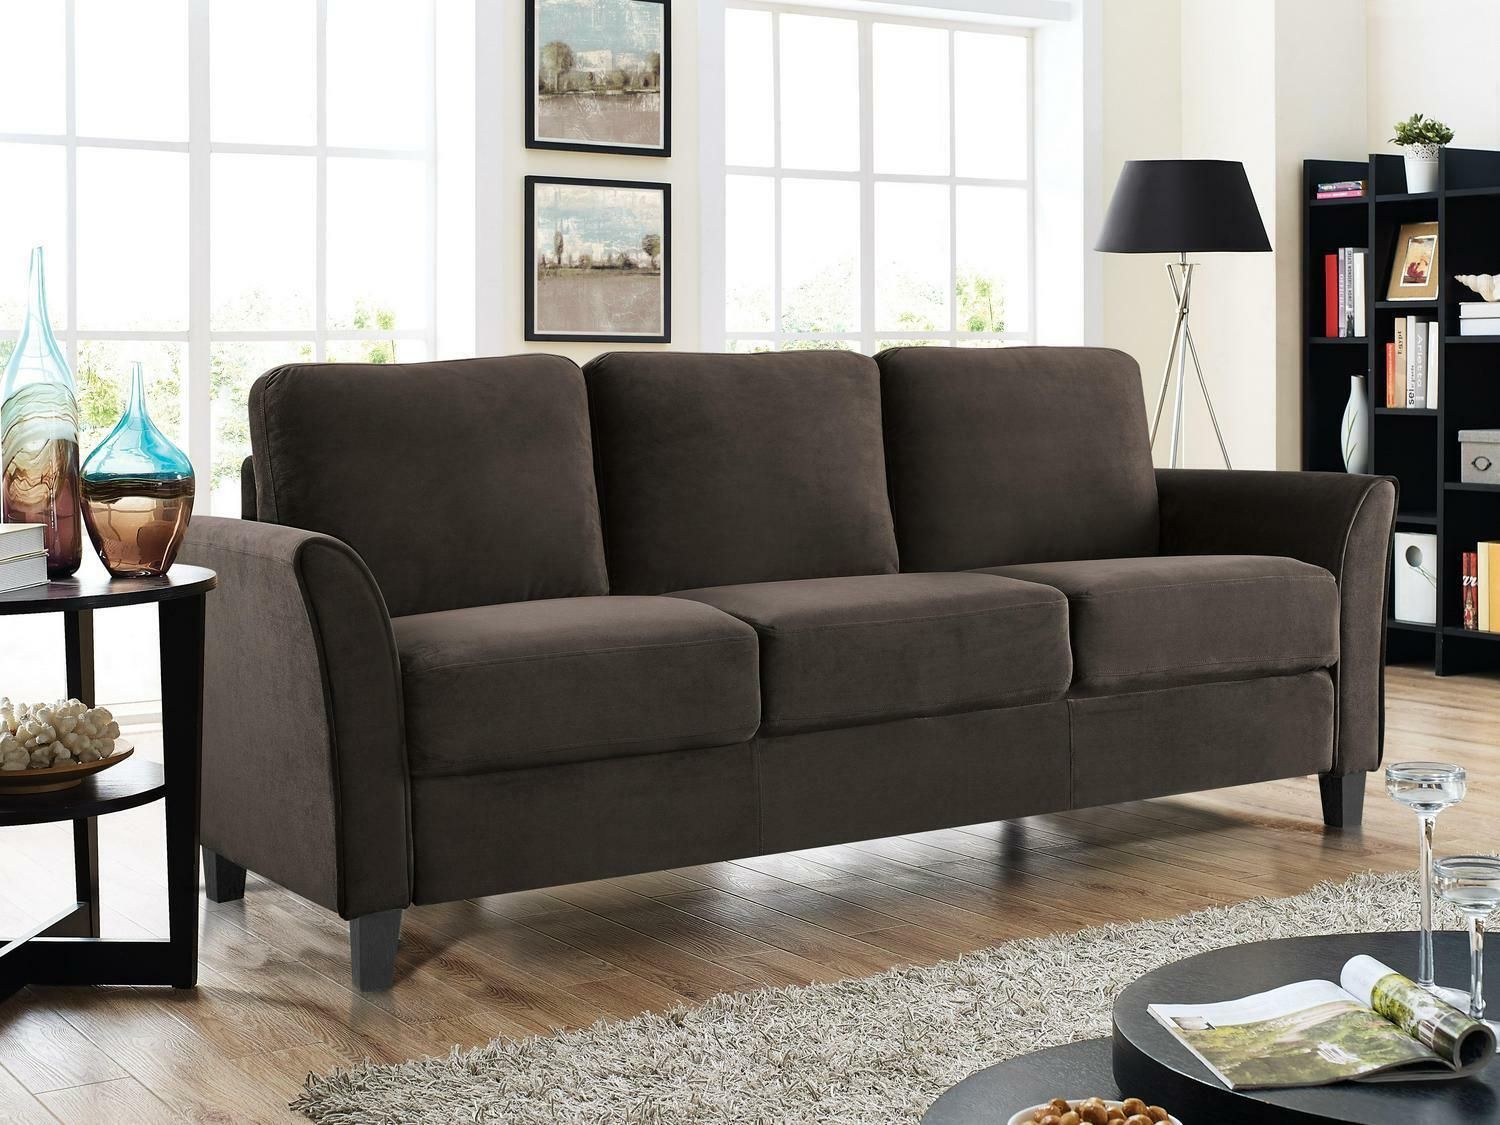 New Modern Alexa 3 Seat Curved Arm Microfiber Sofa Couch Living Room  Furniture | Ebay Intended For Sofas With Curved Arms (Photo 10 of 15)